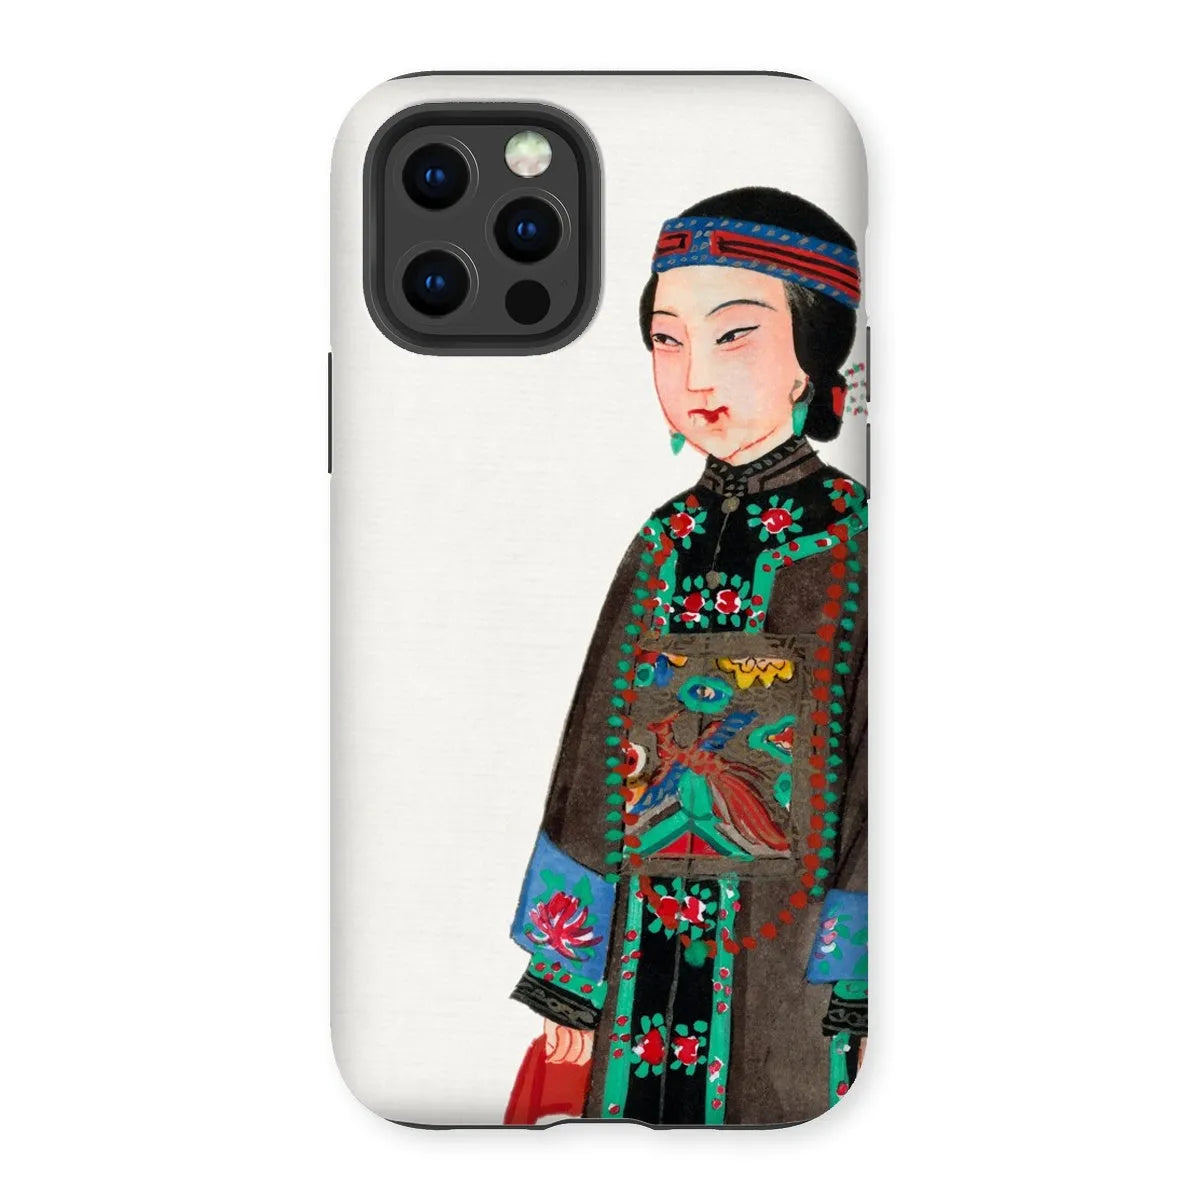 Noblewoman At Court - Chinese Aesthetic Art Phone Case - Iphone 12 Pro / Matte - Mobile Phone Cases - Aesthetic Art